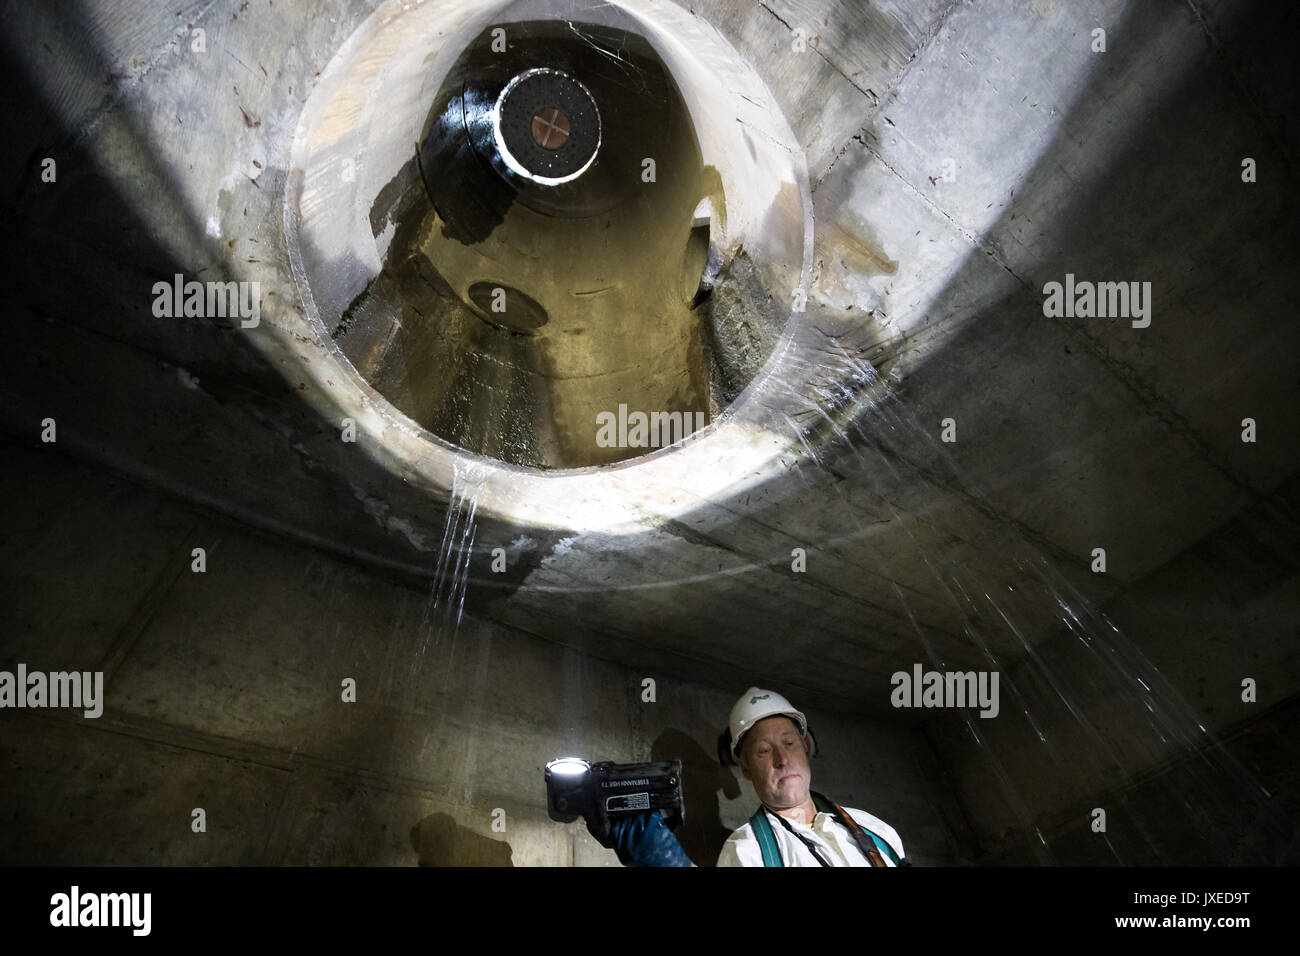 Schweinfurt, Germany. 17th July, 2017. The sewage worker Erwin Wolf lights the underground sewage during an inspeaction walk in Schweinfurt, Germany, 17 July 2017. The sewer in the middle reaches up to a street's drain cover. Unnoticed by many people sewage workers take care that cities do not turn into stinking cesspools. A great amount of the daytime they, therefore, spend in the underground. Photo: Daniel Karmann/dpa/Alamy Live News Stock Photo